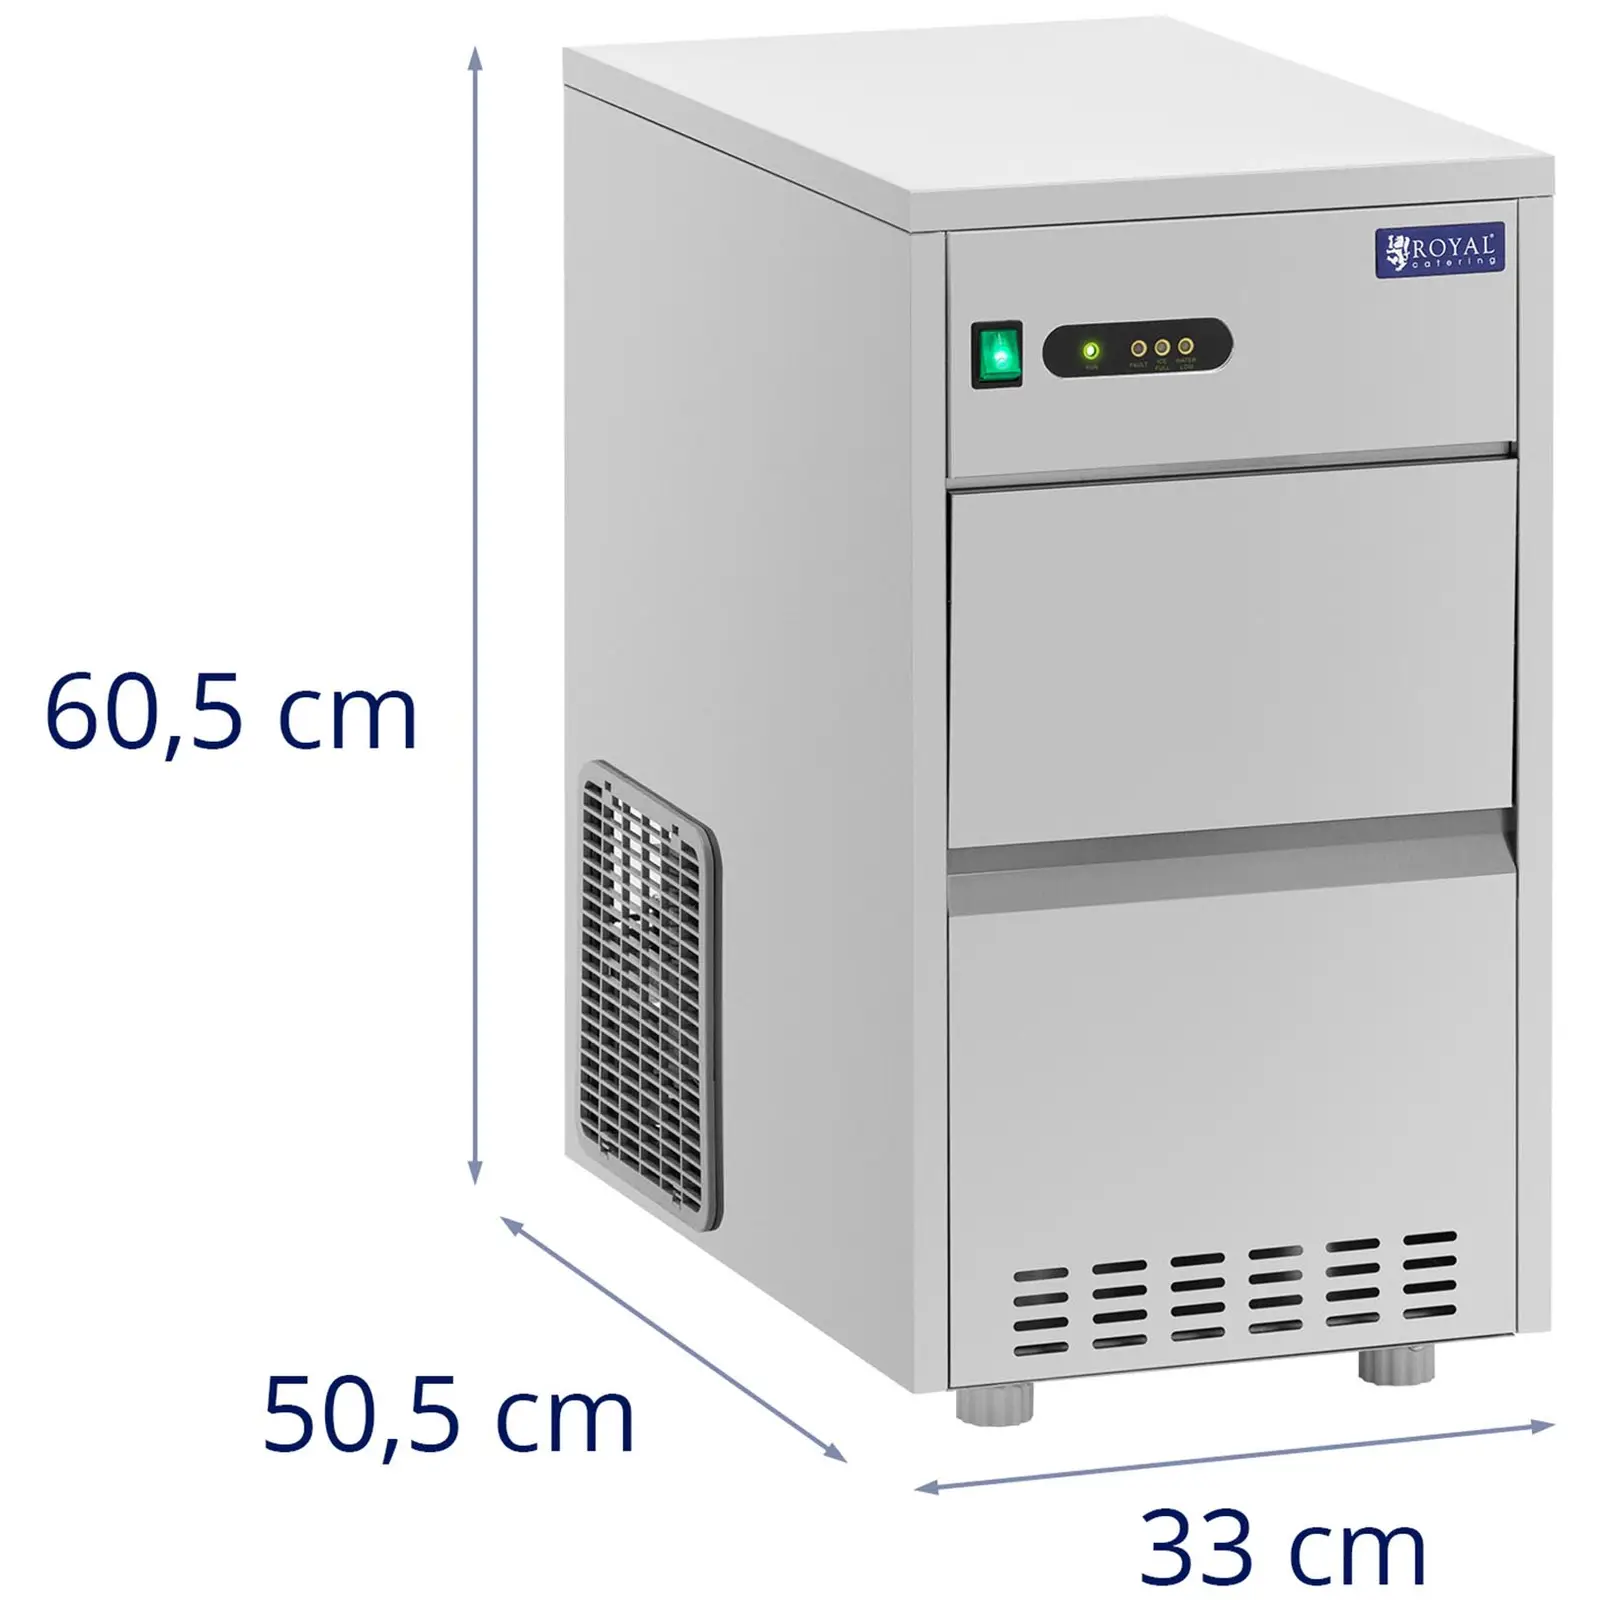 Ice Maker Machine - 20 kg/24 h - 5 kg capacity - 165 W - Stainless steel - Royal Catering